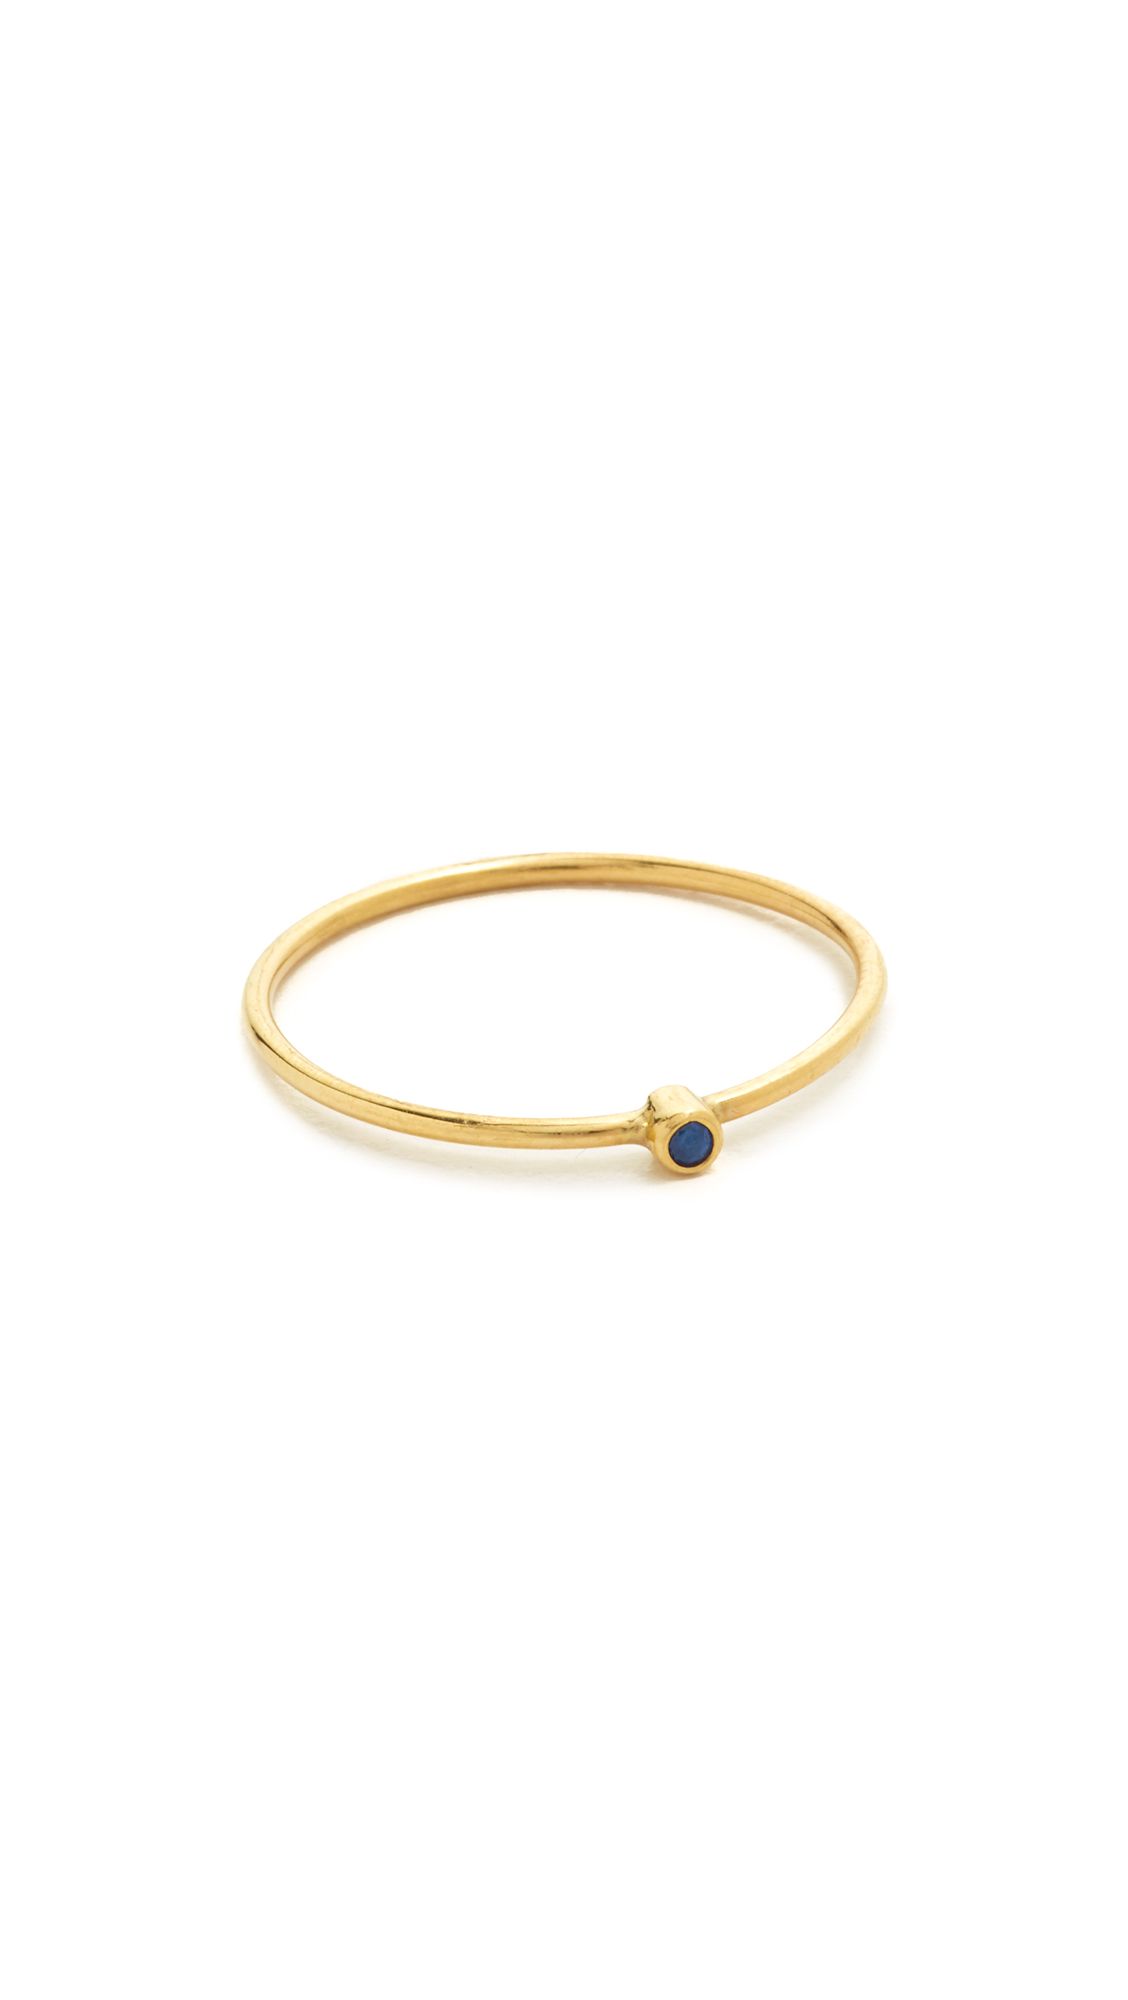 18k Gold Thin Ring with Sapphire | Shopbop